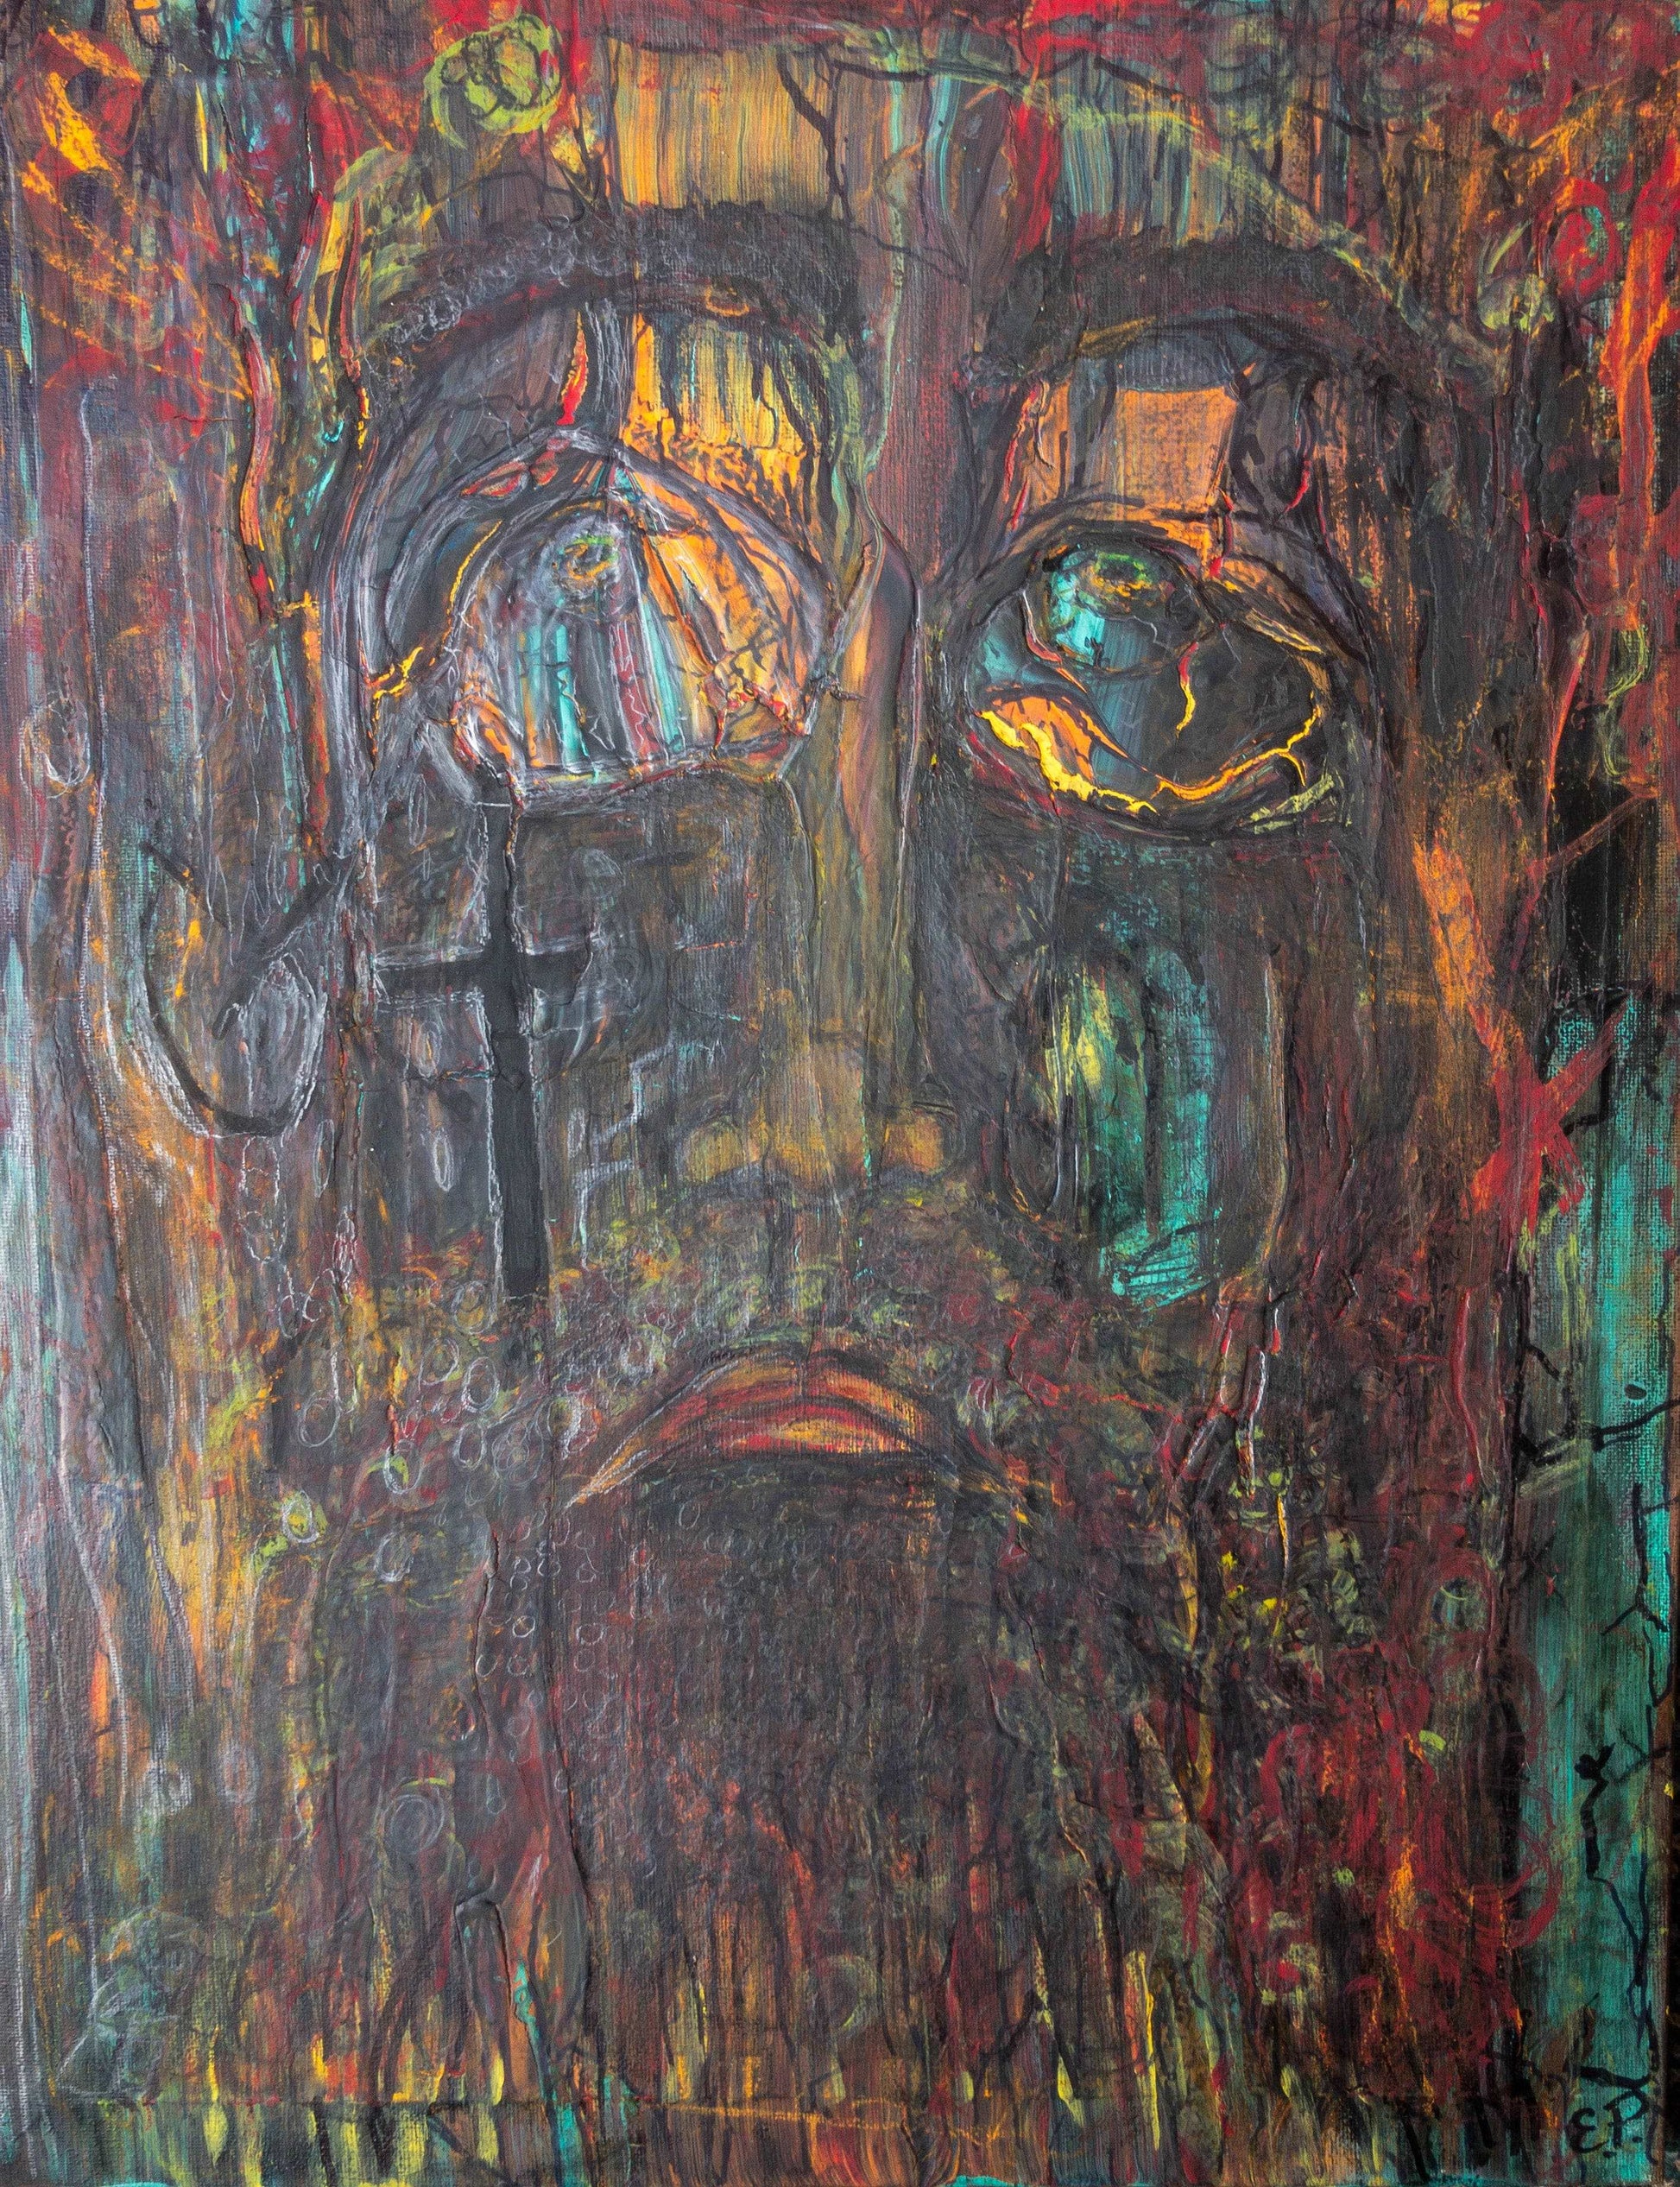 Forgiven - Sad Face, Religious, Mixed Media, Original, Canvas Painting by Art with Evie